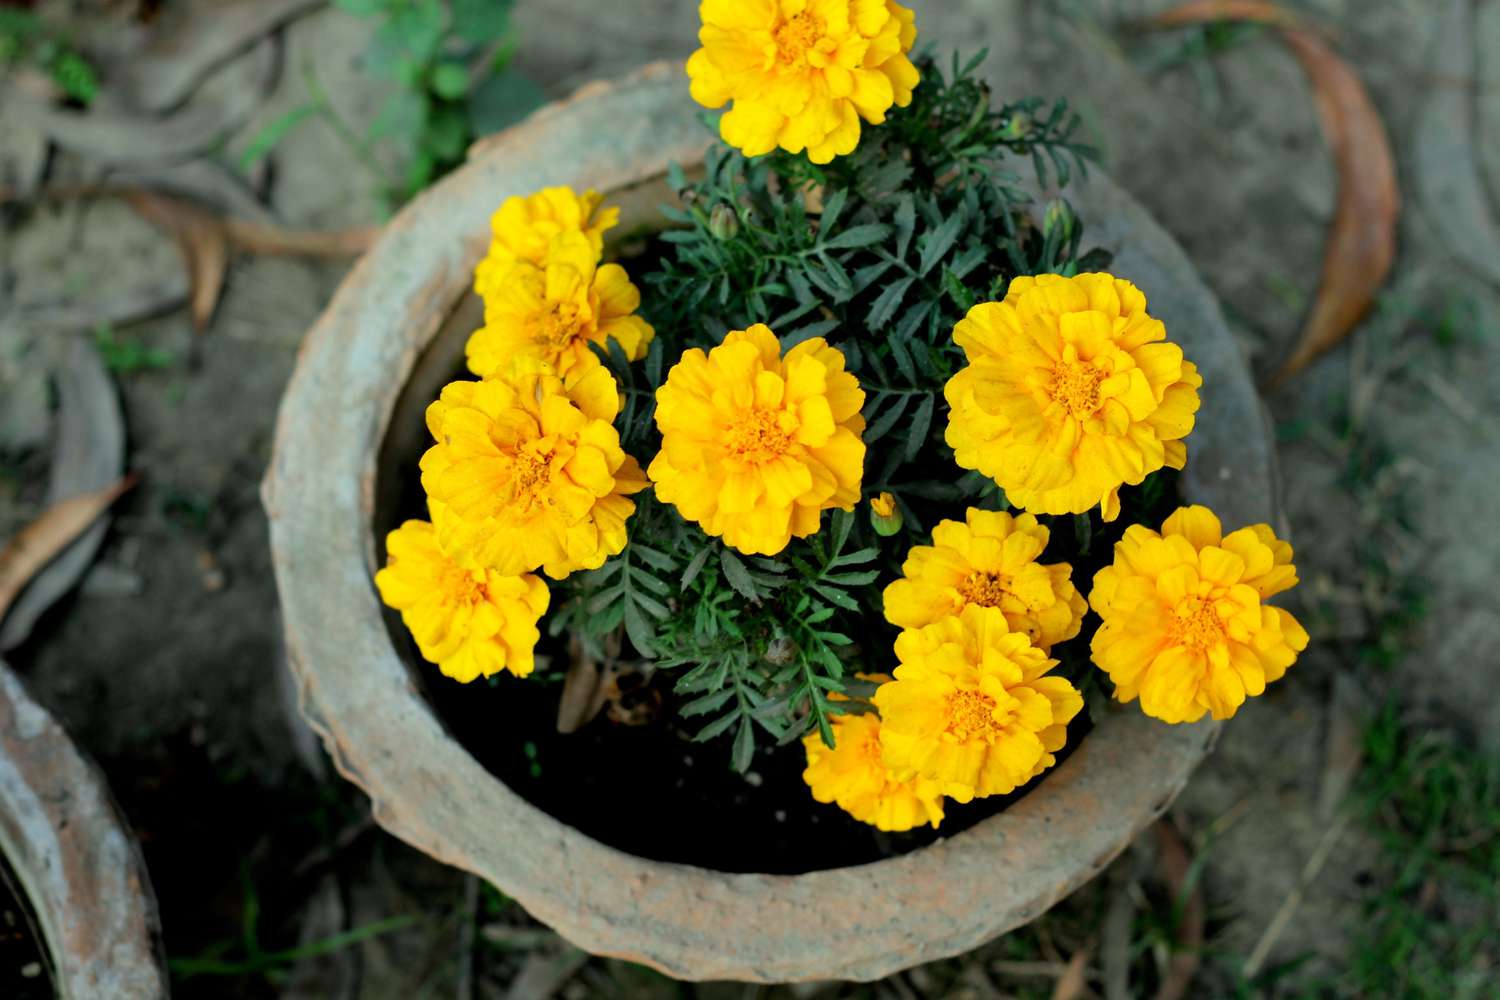 Yellow marigolds in container.